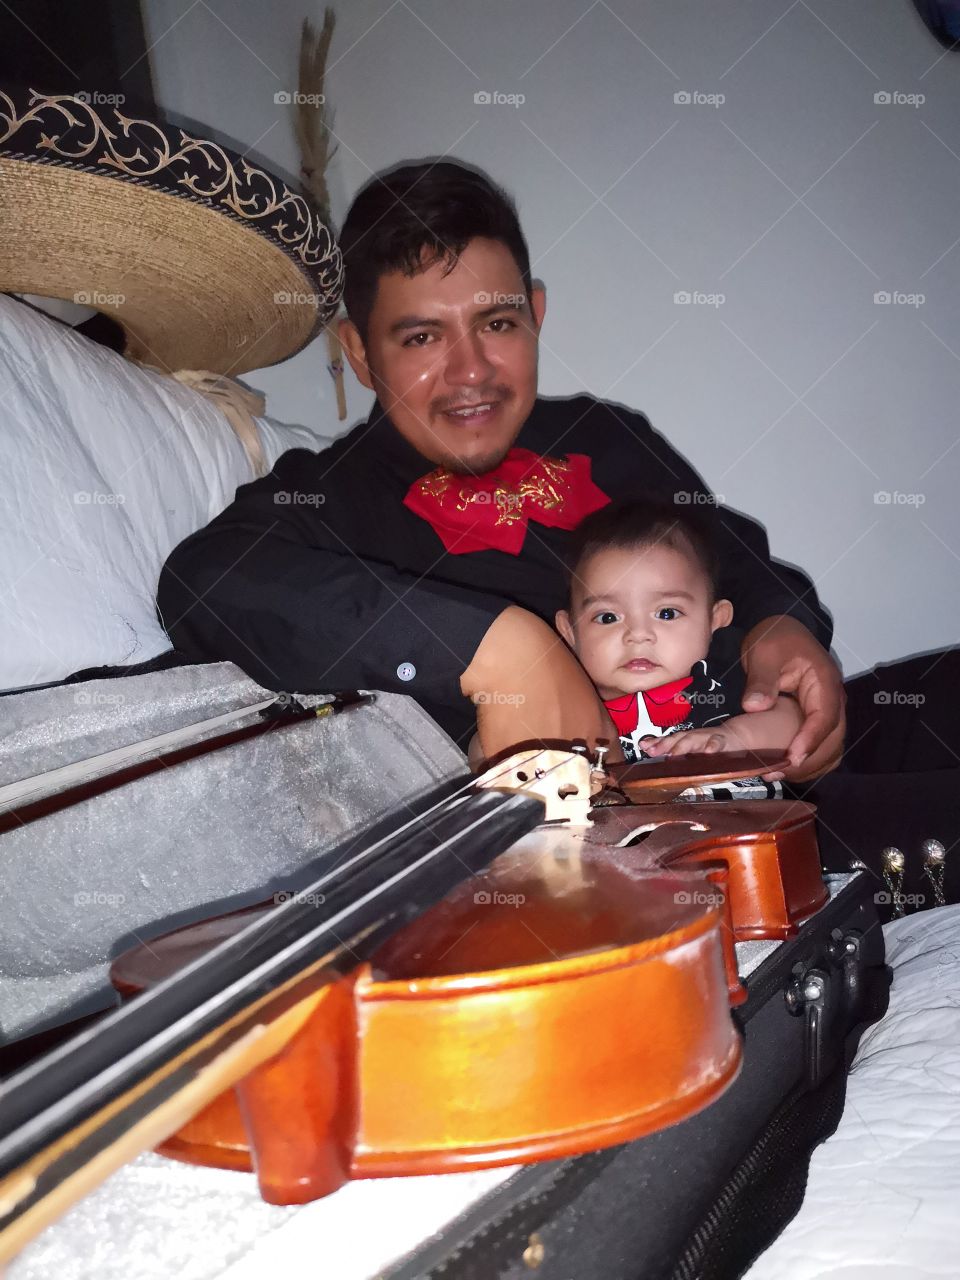 mariachi Is a really lovely job in Mexico. they are so talented. In group they can play the most beautiful music. I love mariachi music, is the soul in the all party's